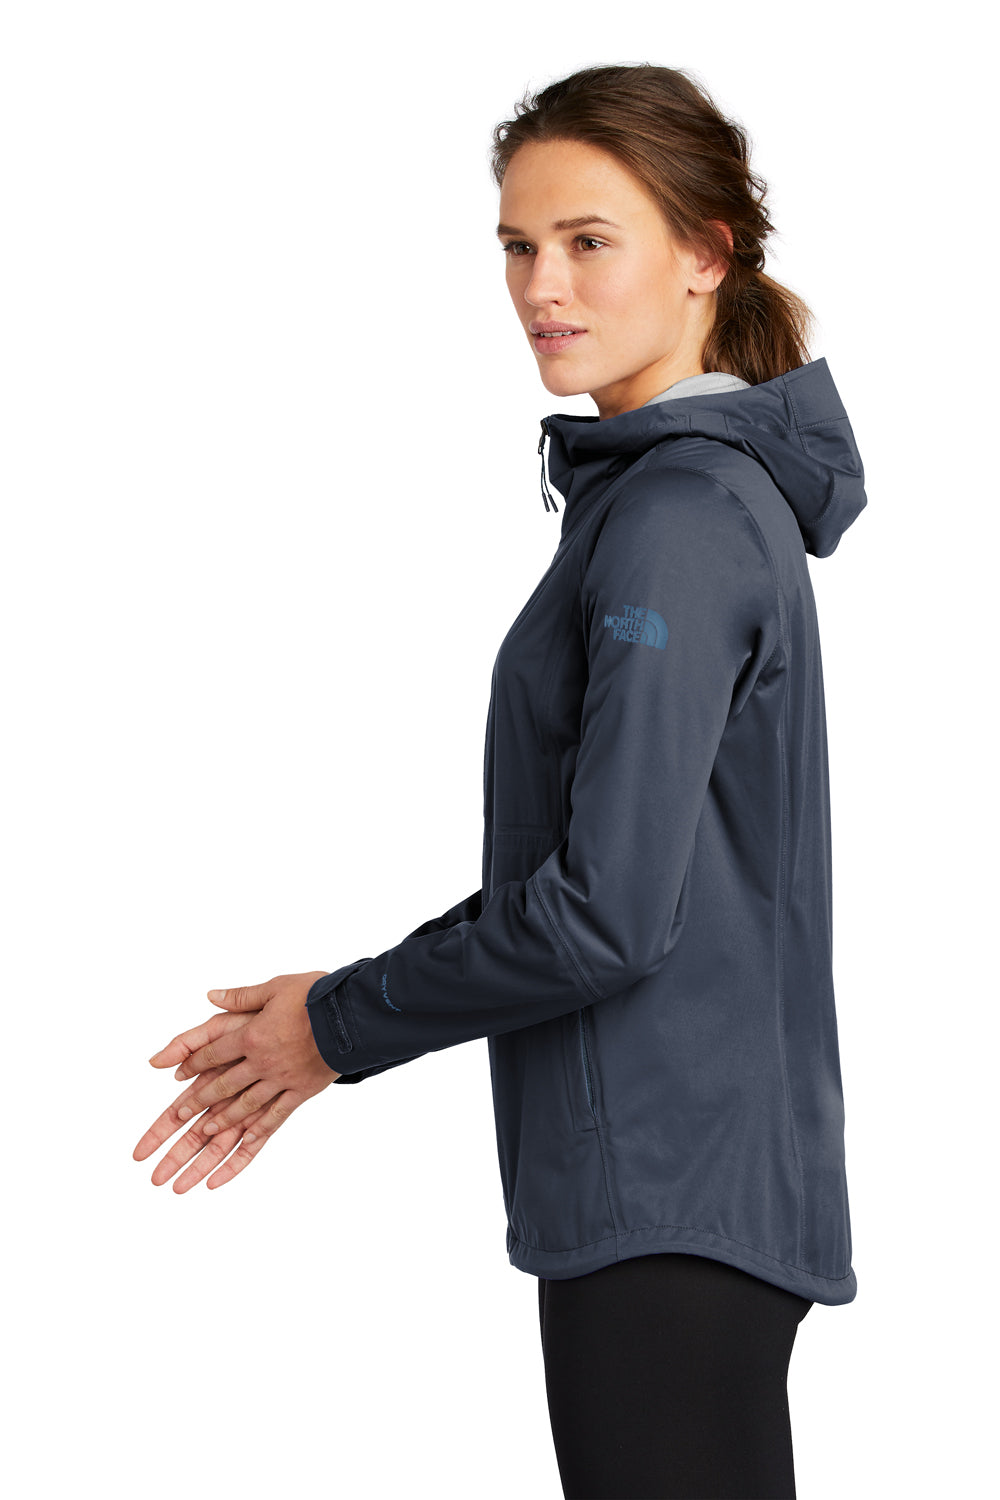 The North Face Womens All Weather DryVent Stretch Full Zip Hooded Jacket Urban Navy Blue Side